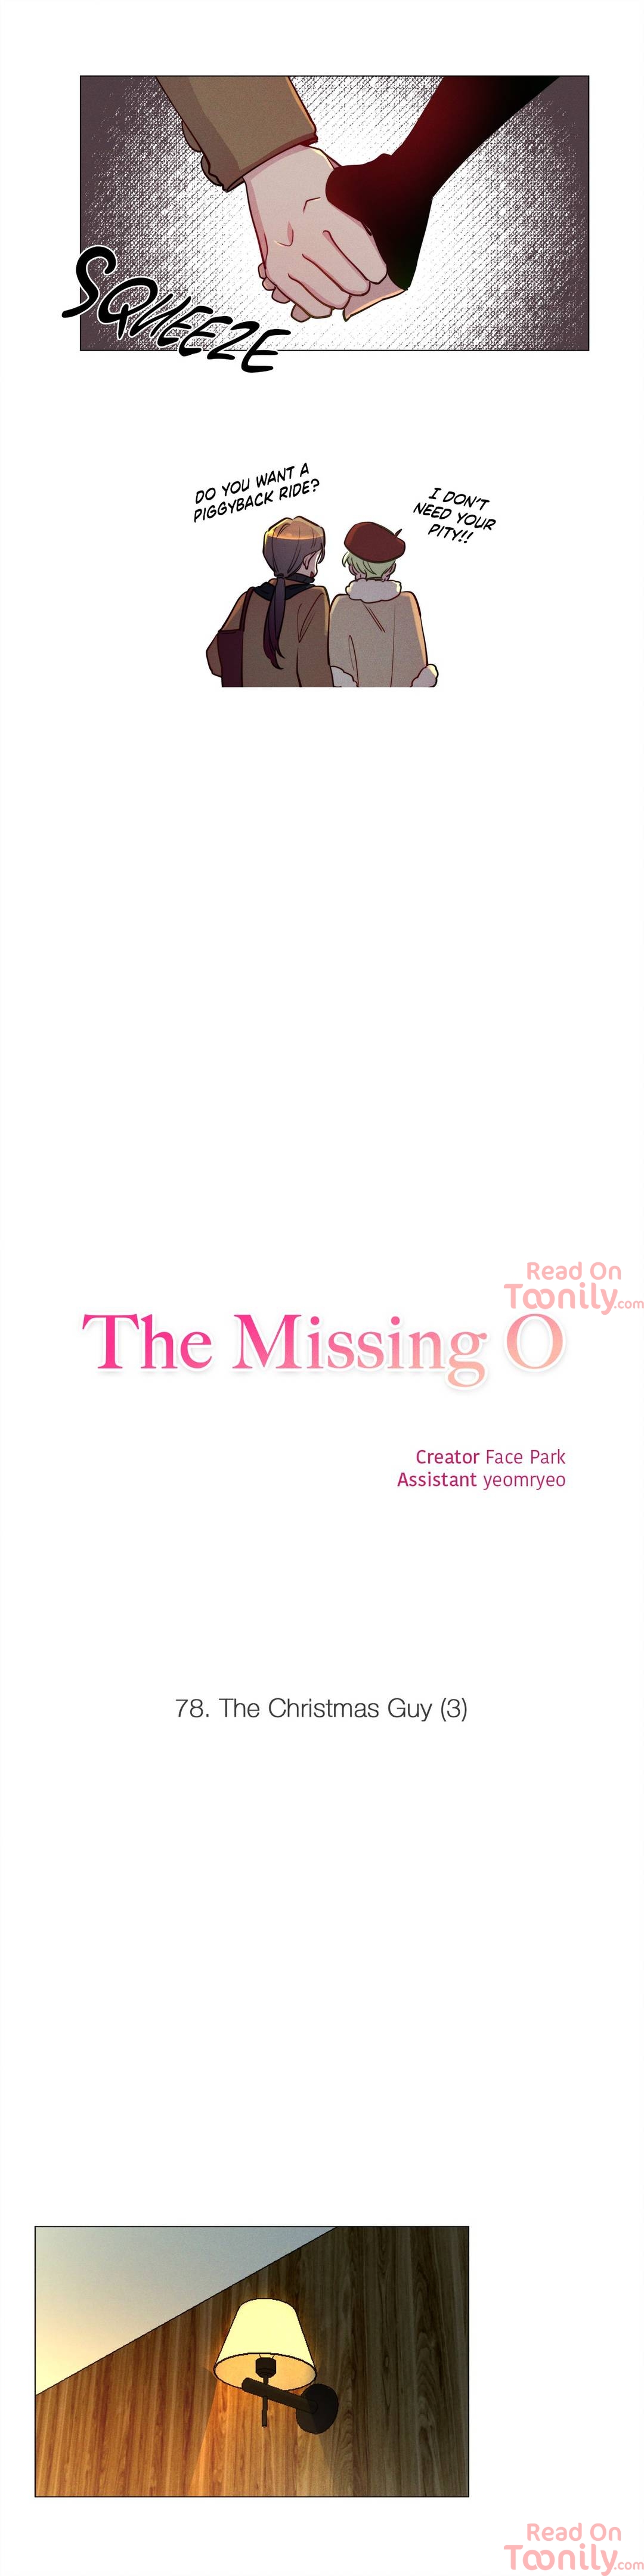 The Missing O image